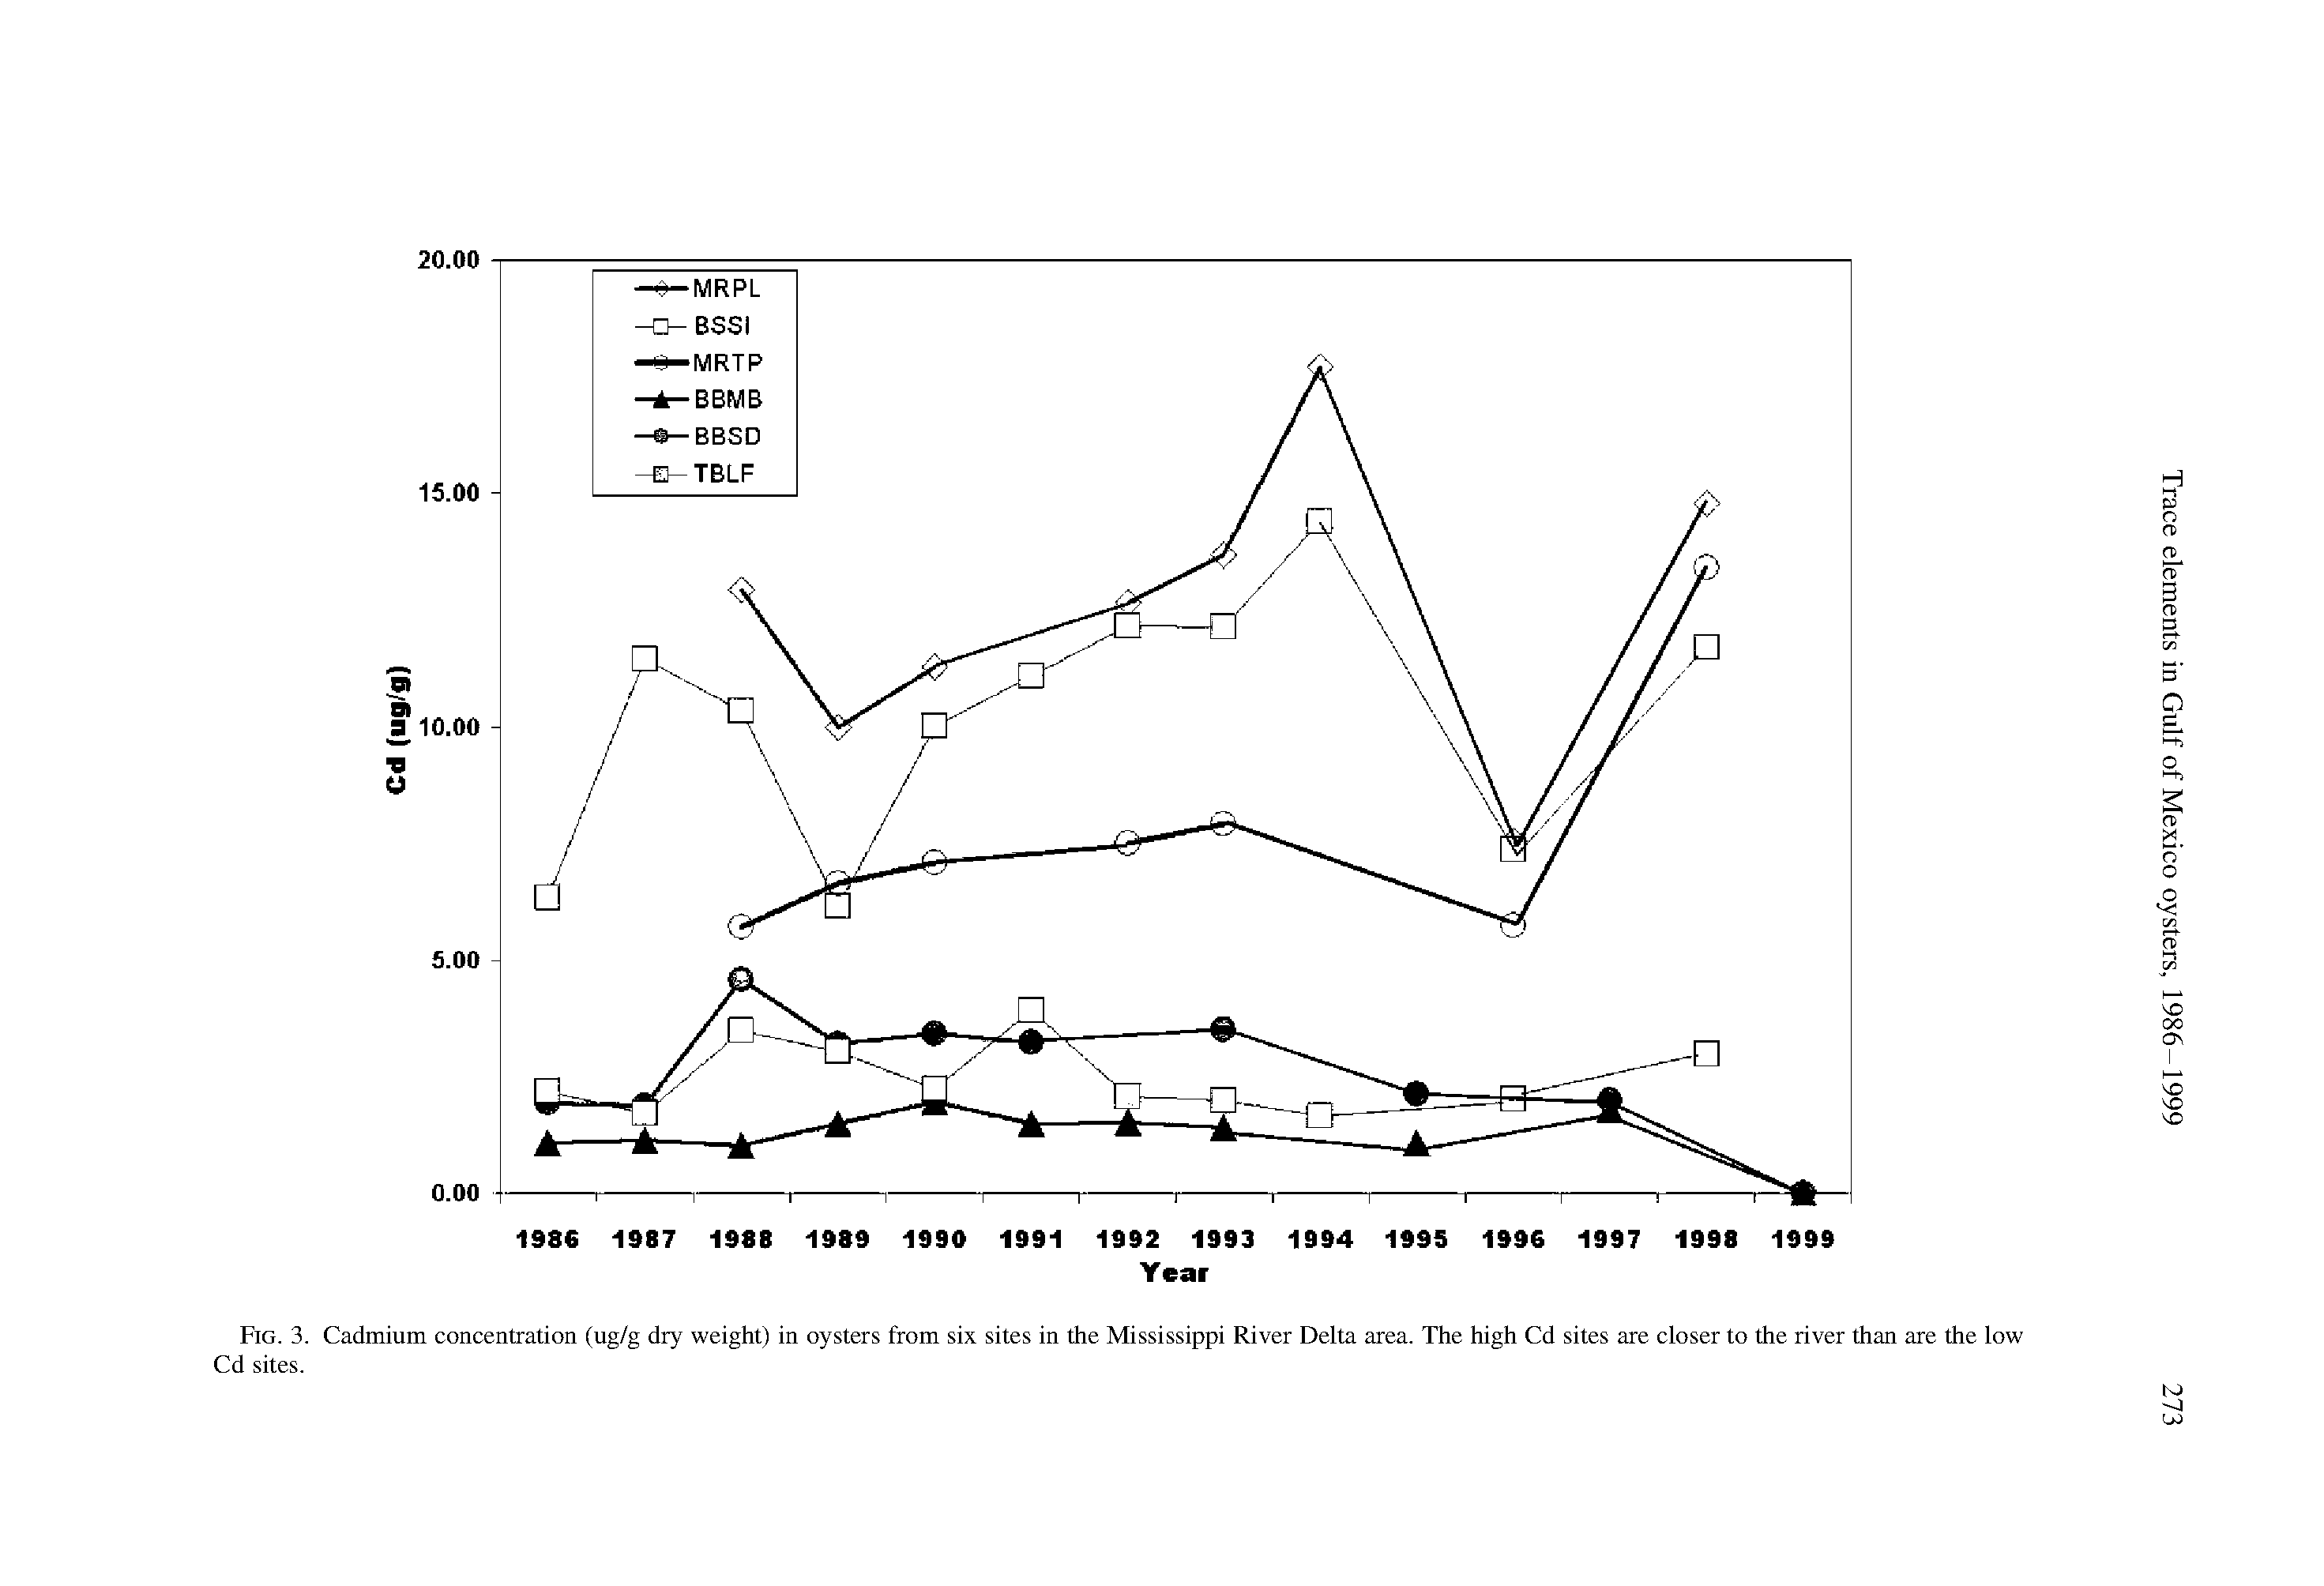 Fig. 3. Cadmium concentration (ug/g dry weight) in oysters from six sites in the Mississippi River Delta area. The high Cd sites are closer to the river than are the low Cd sites.